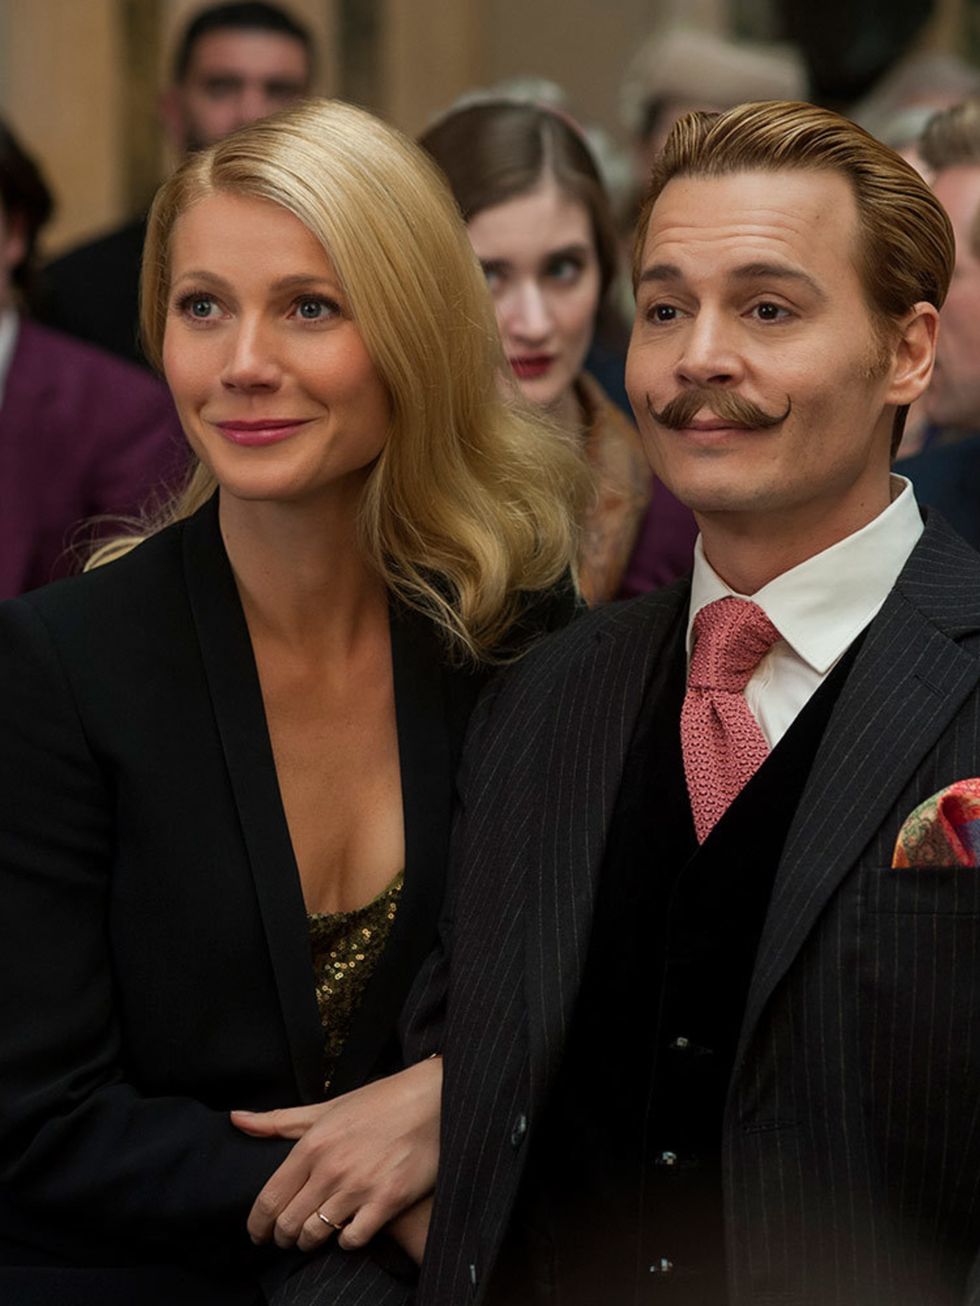 <p><strong>FILM: Mortdecai</strong><br />
<br />
Johnny Depp heads an all-star cast in this comedy caper, which also features Gwyneth Paltrow, Ewan McGregor and Olivia Munn.<br />
<br />
Depp plays Charlie Mortdecai, an art dealer on the hunt for a stolen